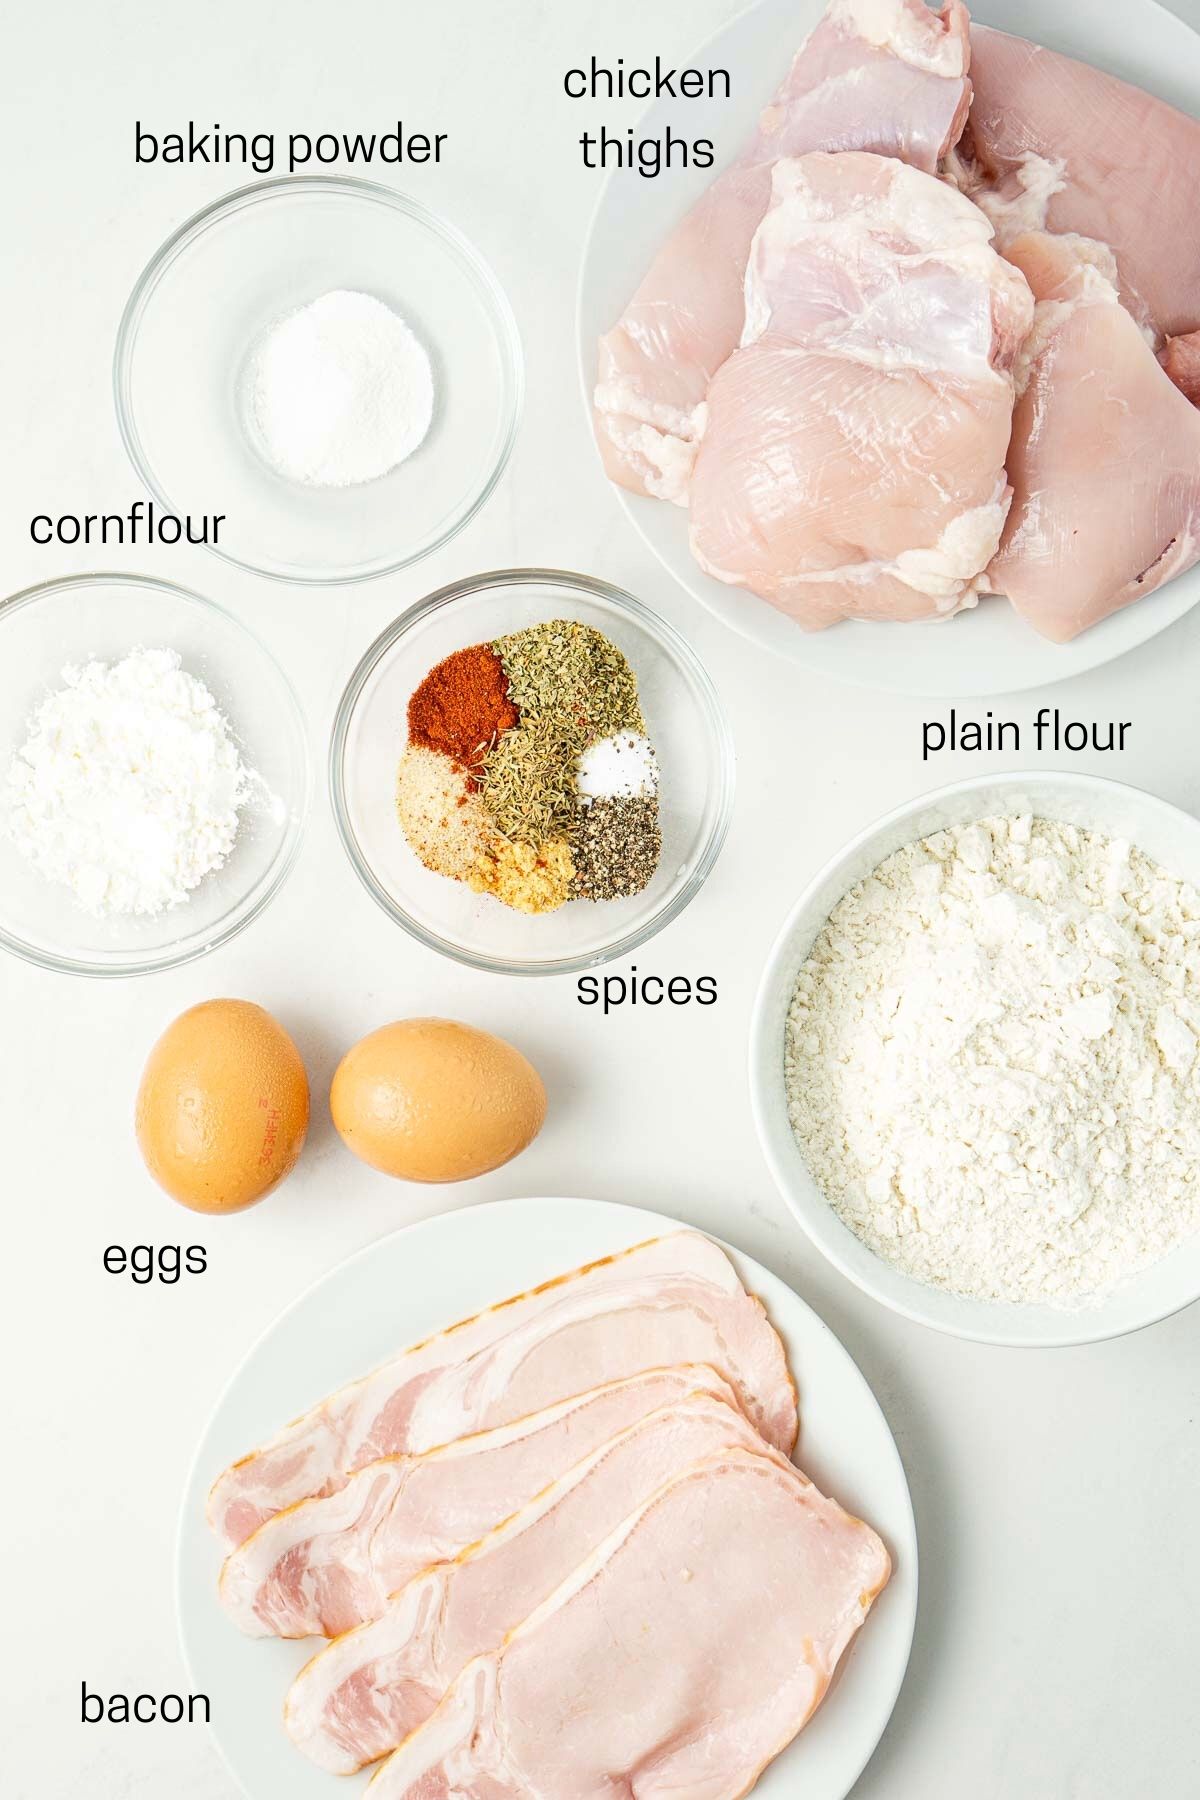 All ingredients laid out needed to make fried chicken burgers.